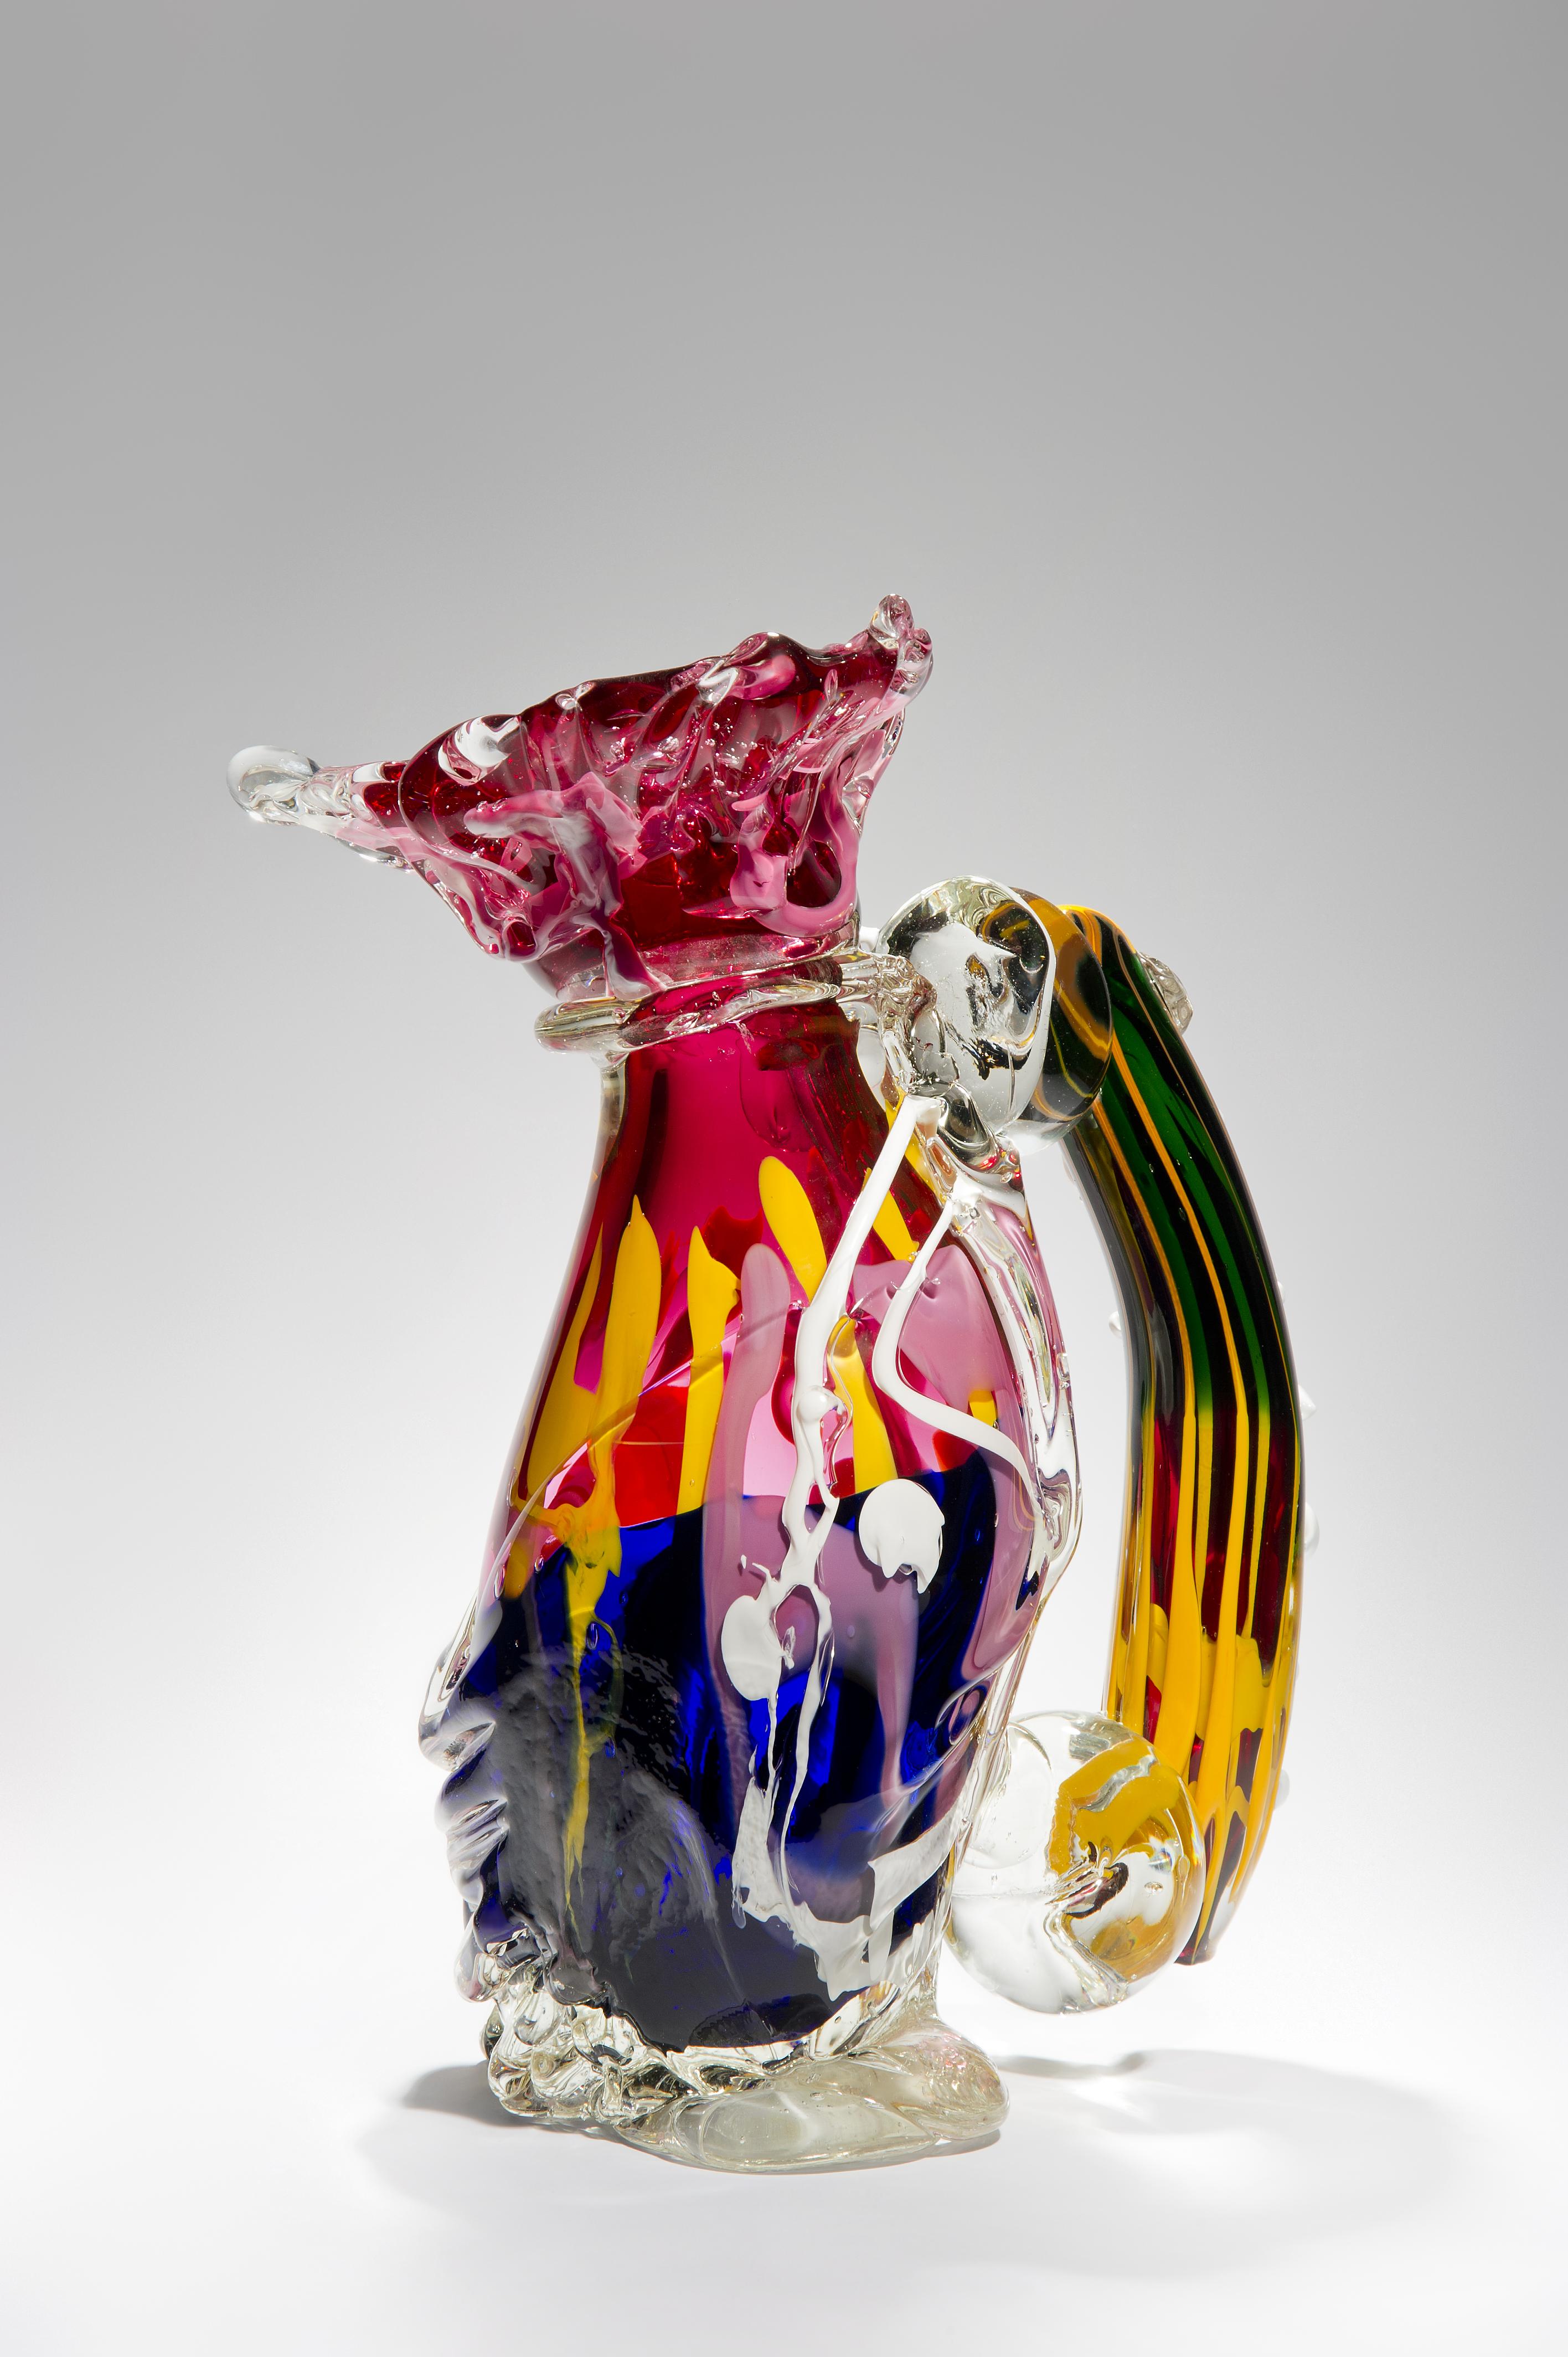 I was S, is a unique clear and multicolored glass sculpture by the Swedish artist Fredrik Nielsen. The artist literally freehand sculpts his glass to create these monumental artworks.

Predominantly experimental, Nielsen’s artworks are made in